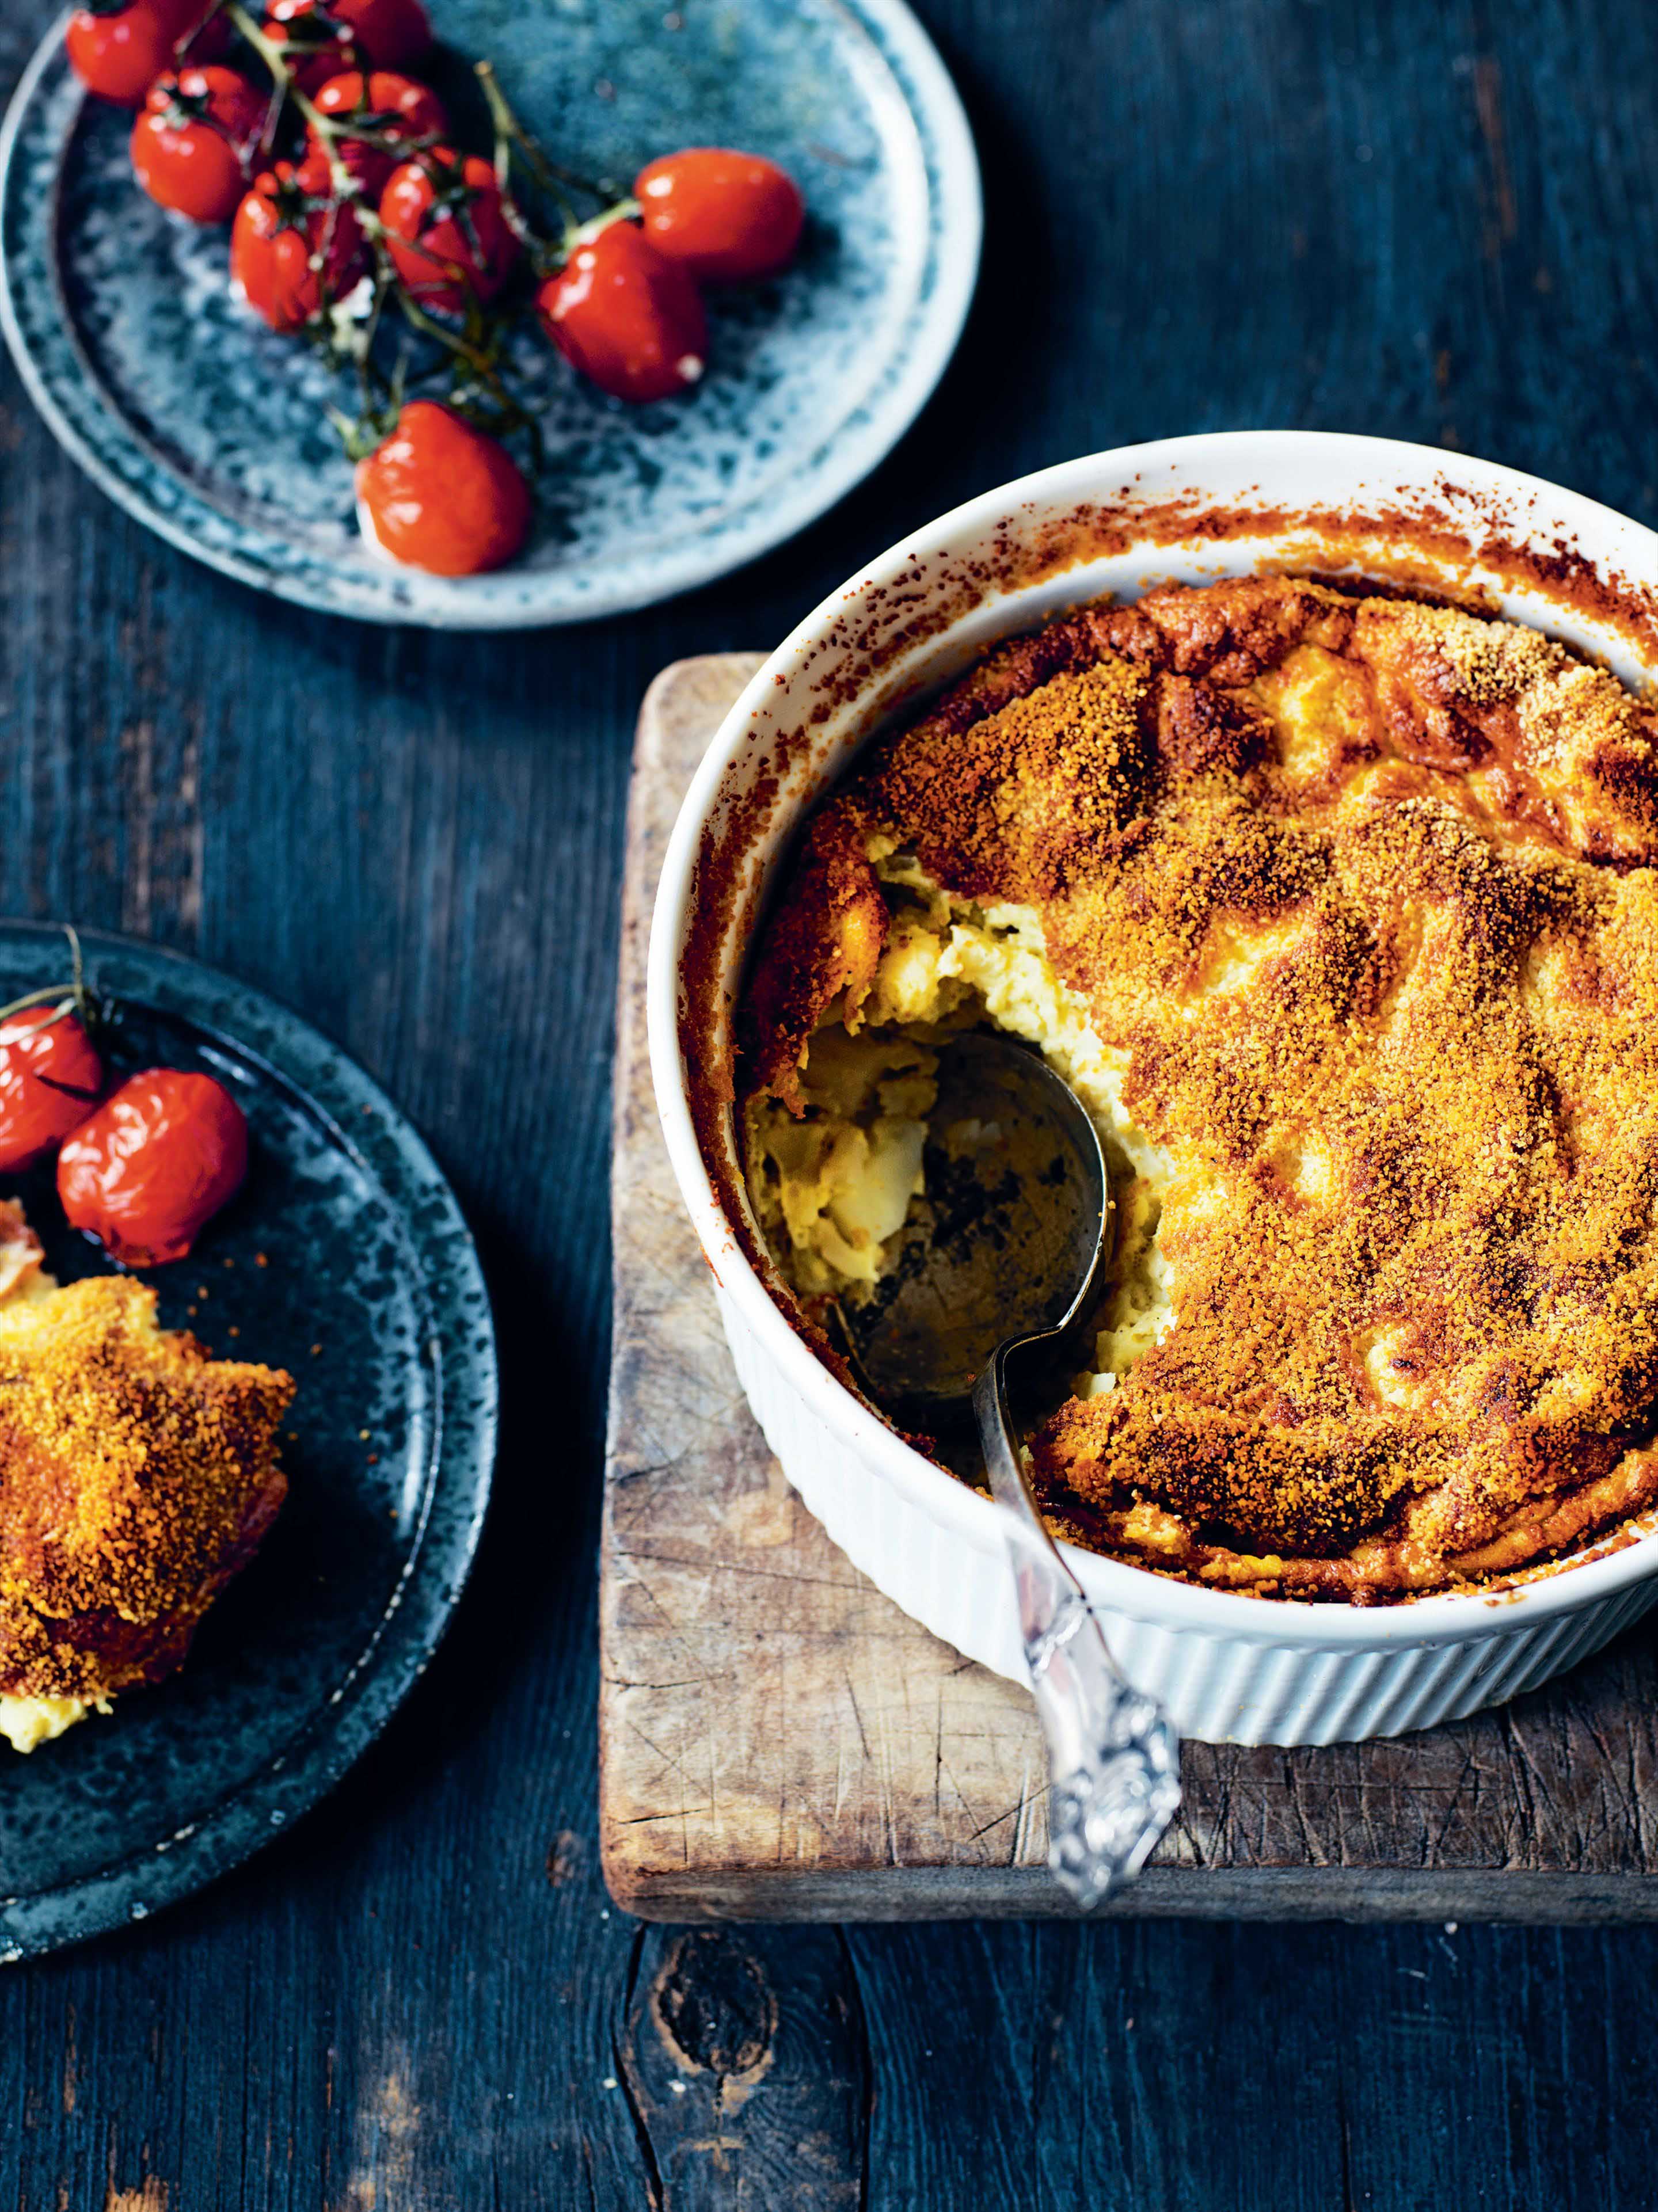 Cauliflower gratin with baked tomatoes